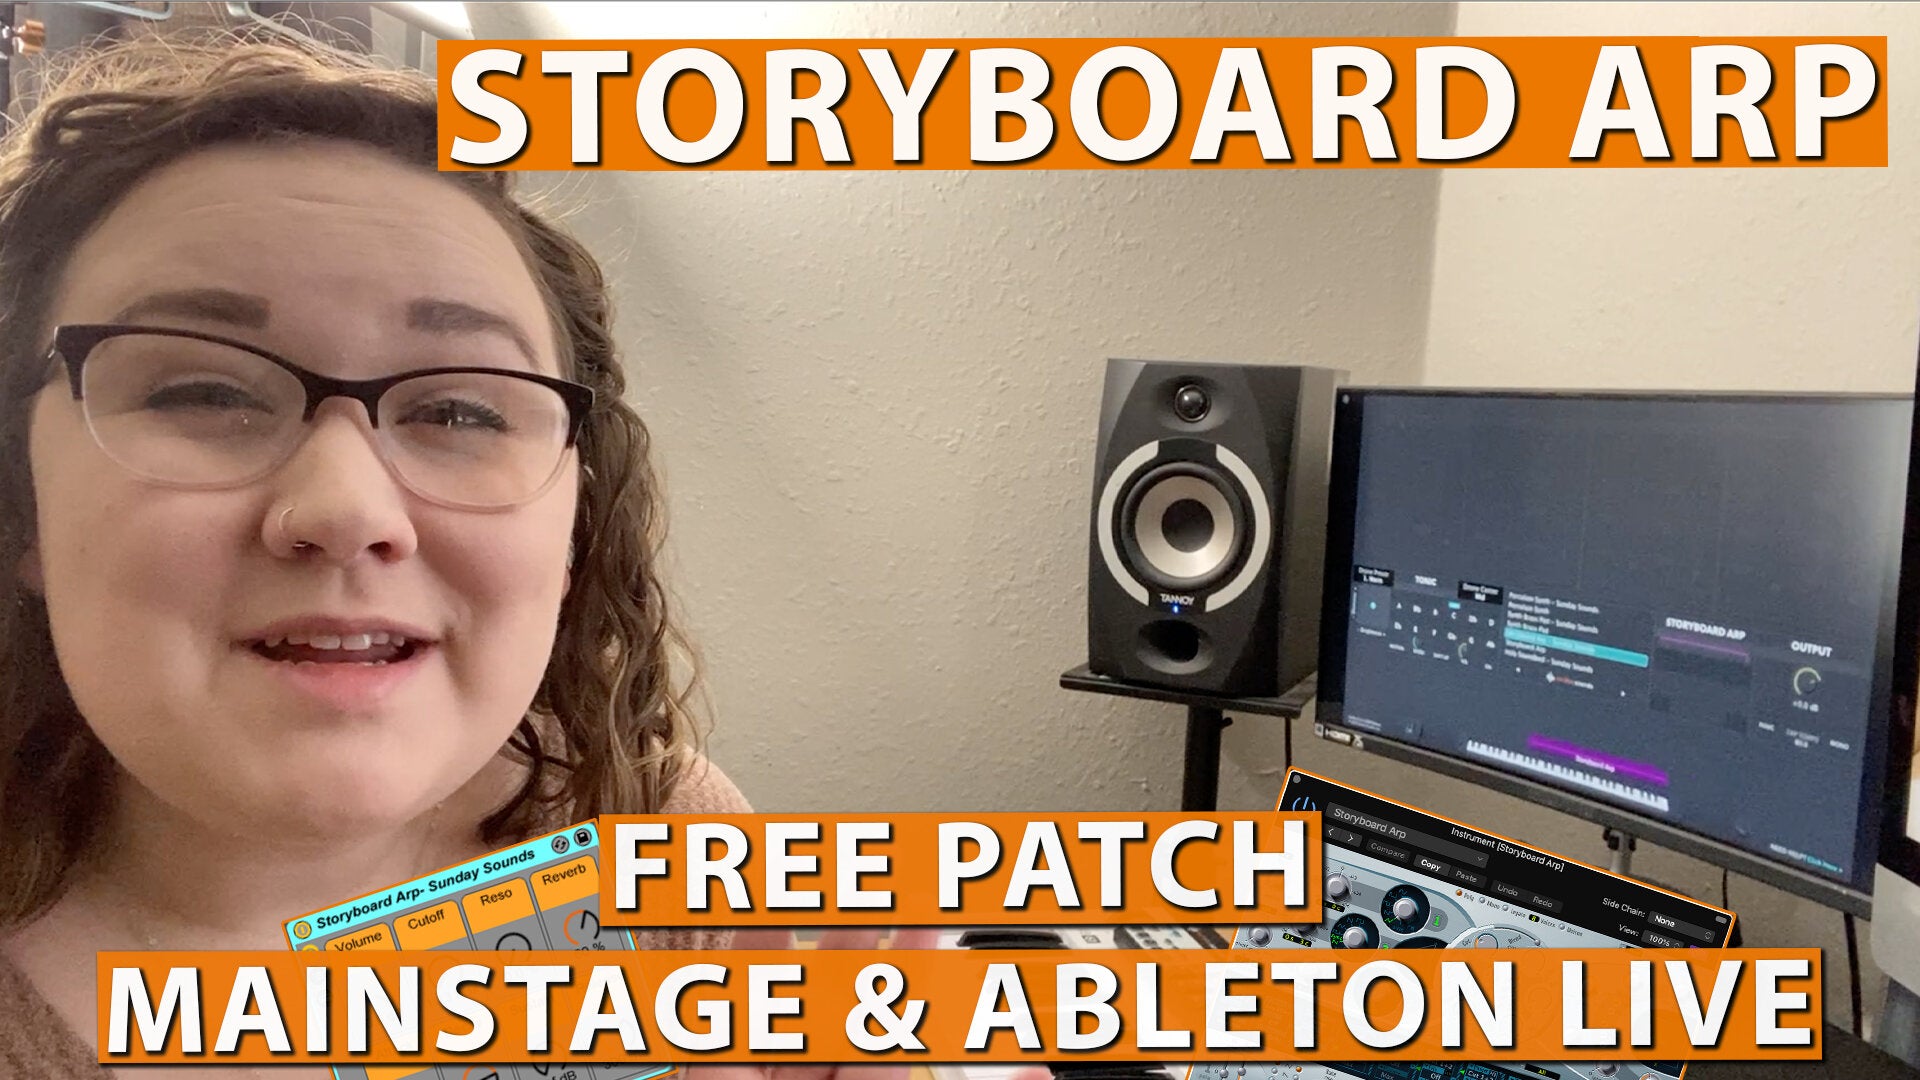 Free MainStage & Ableton Worship Patch! - Storyboard Arp